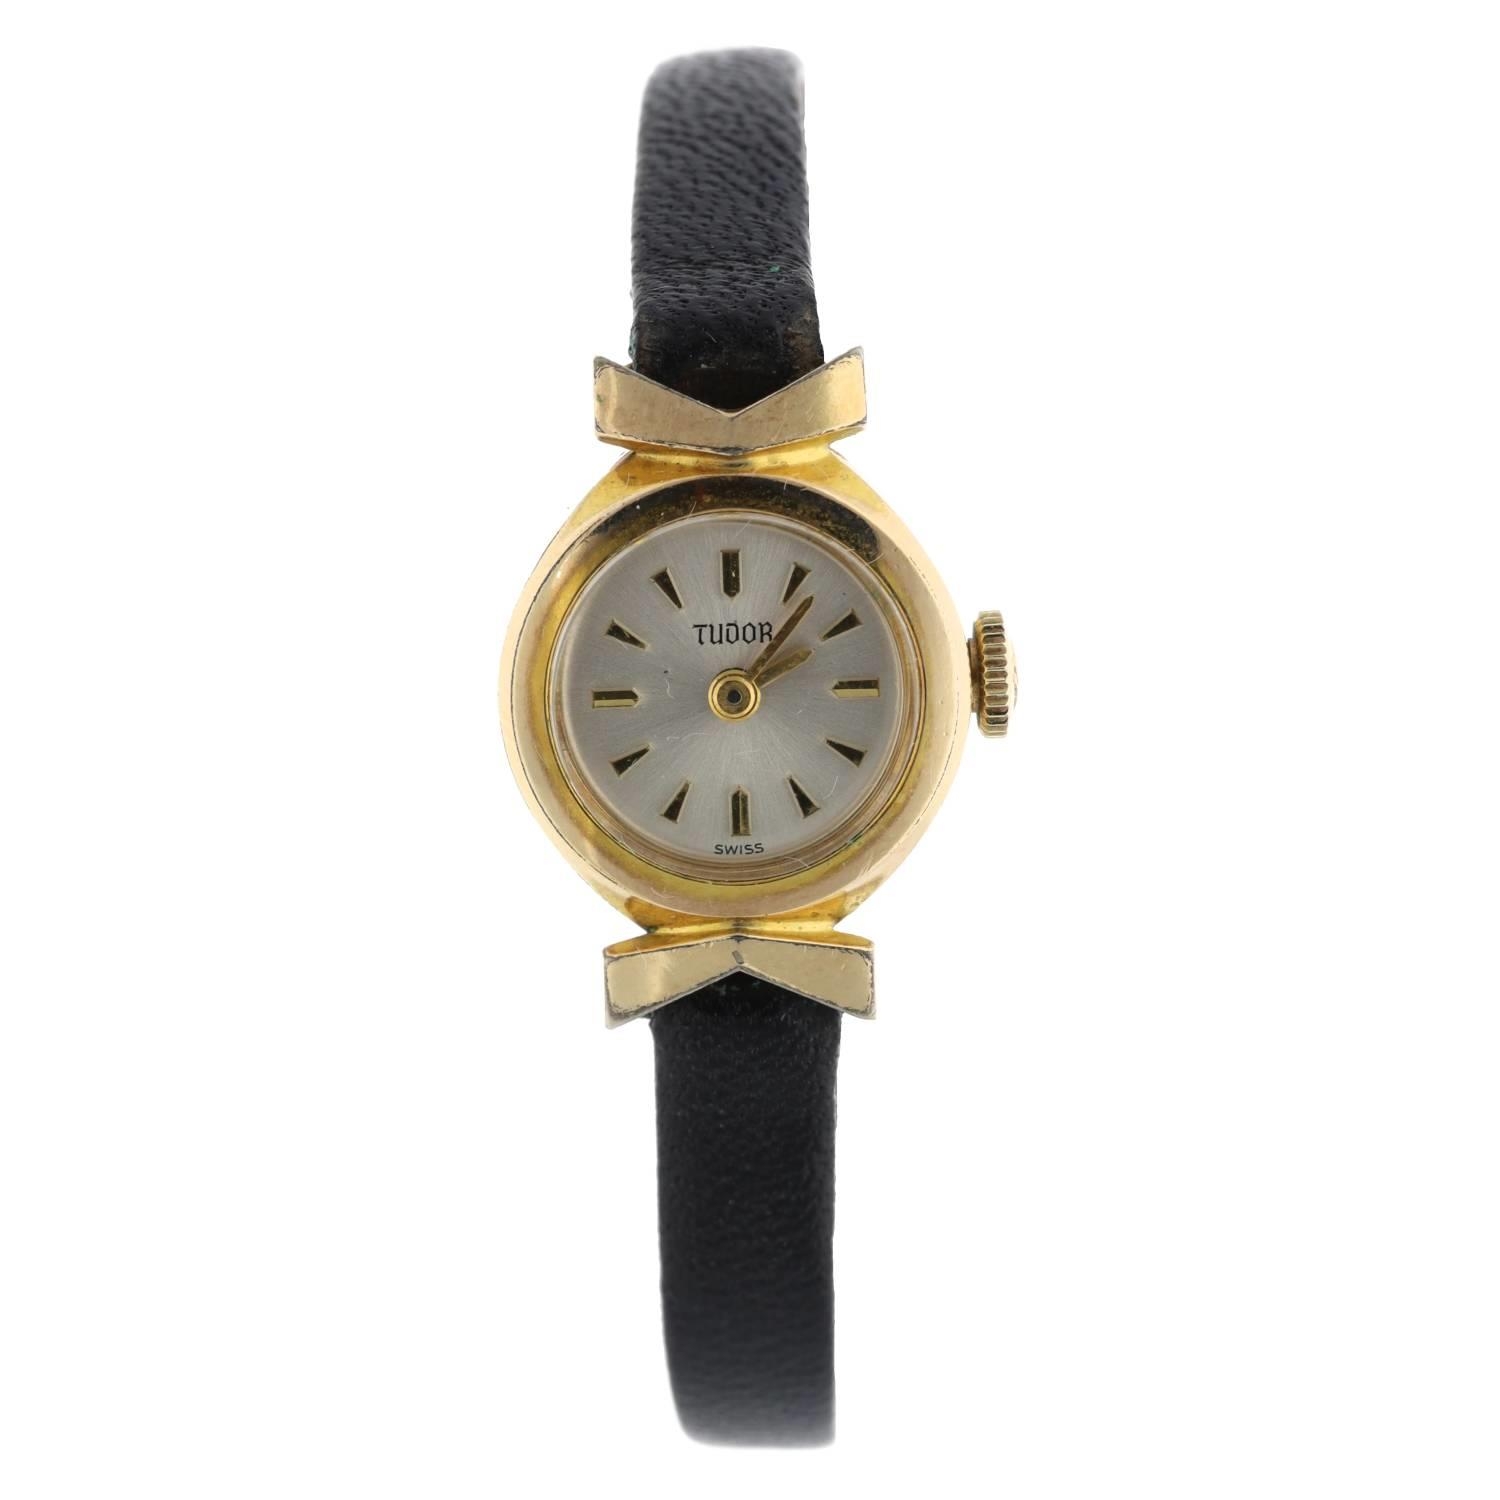 Tudor gold plated and stainless steel lady's wristwatch, reference no. 1726, serial no. 3198xx,